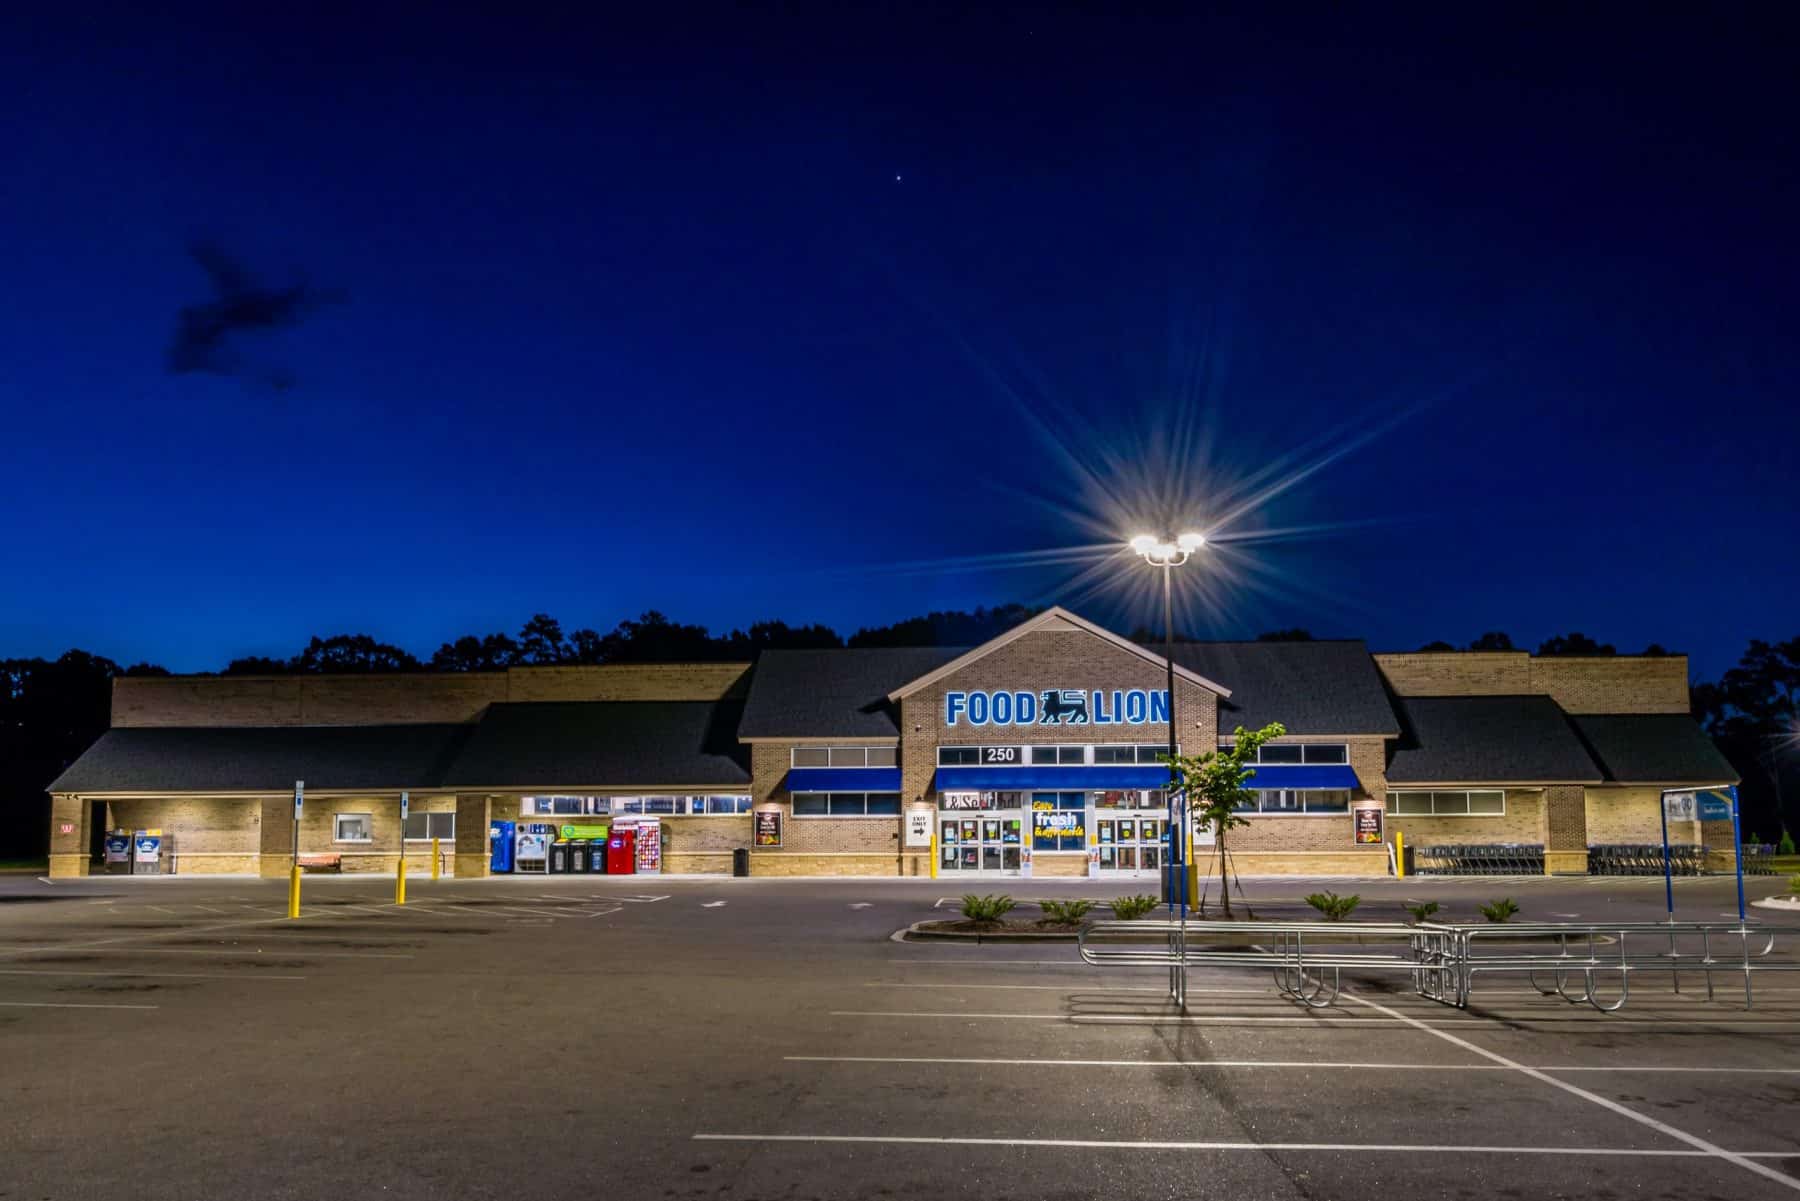 Evening front shot of the Food Lion building